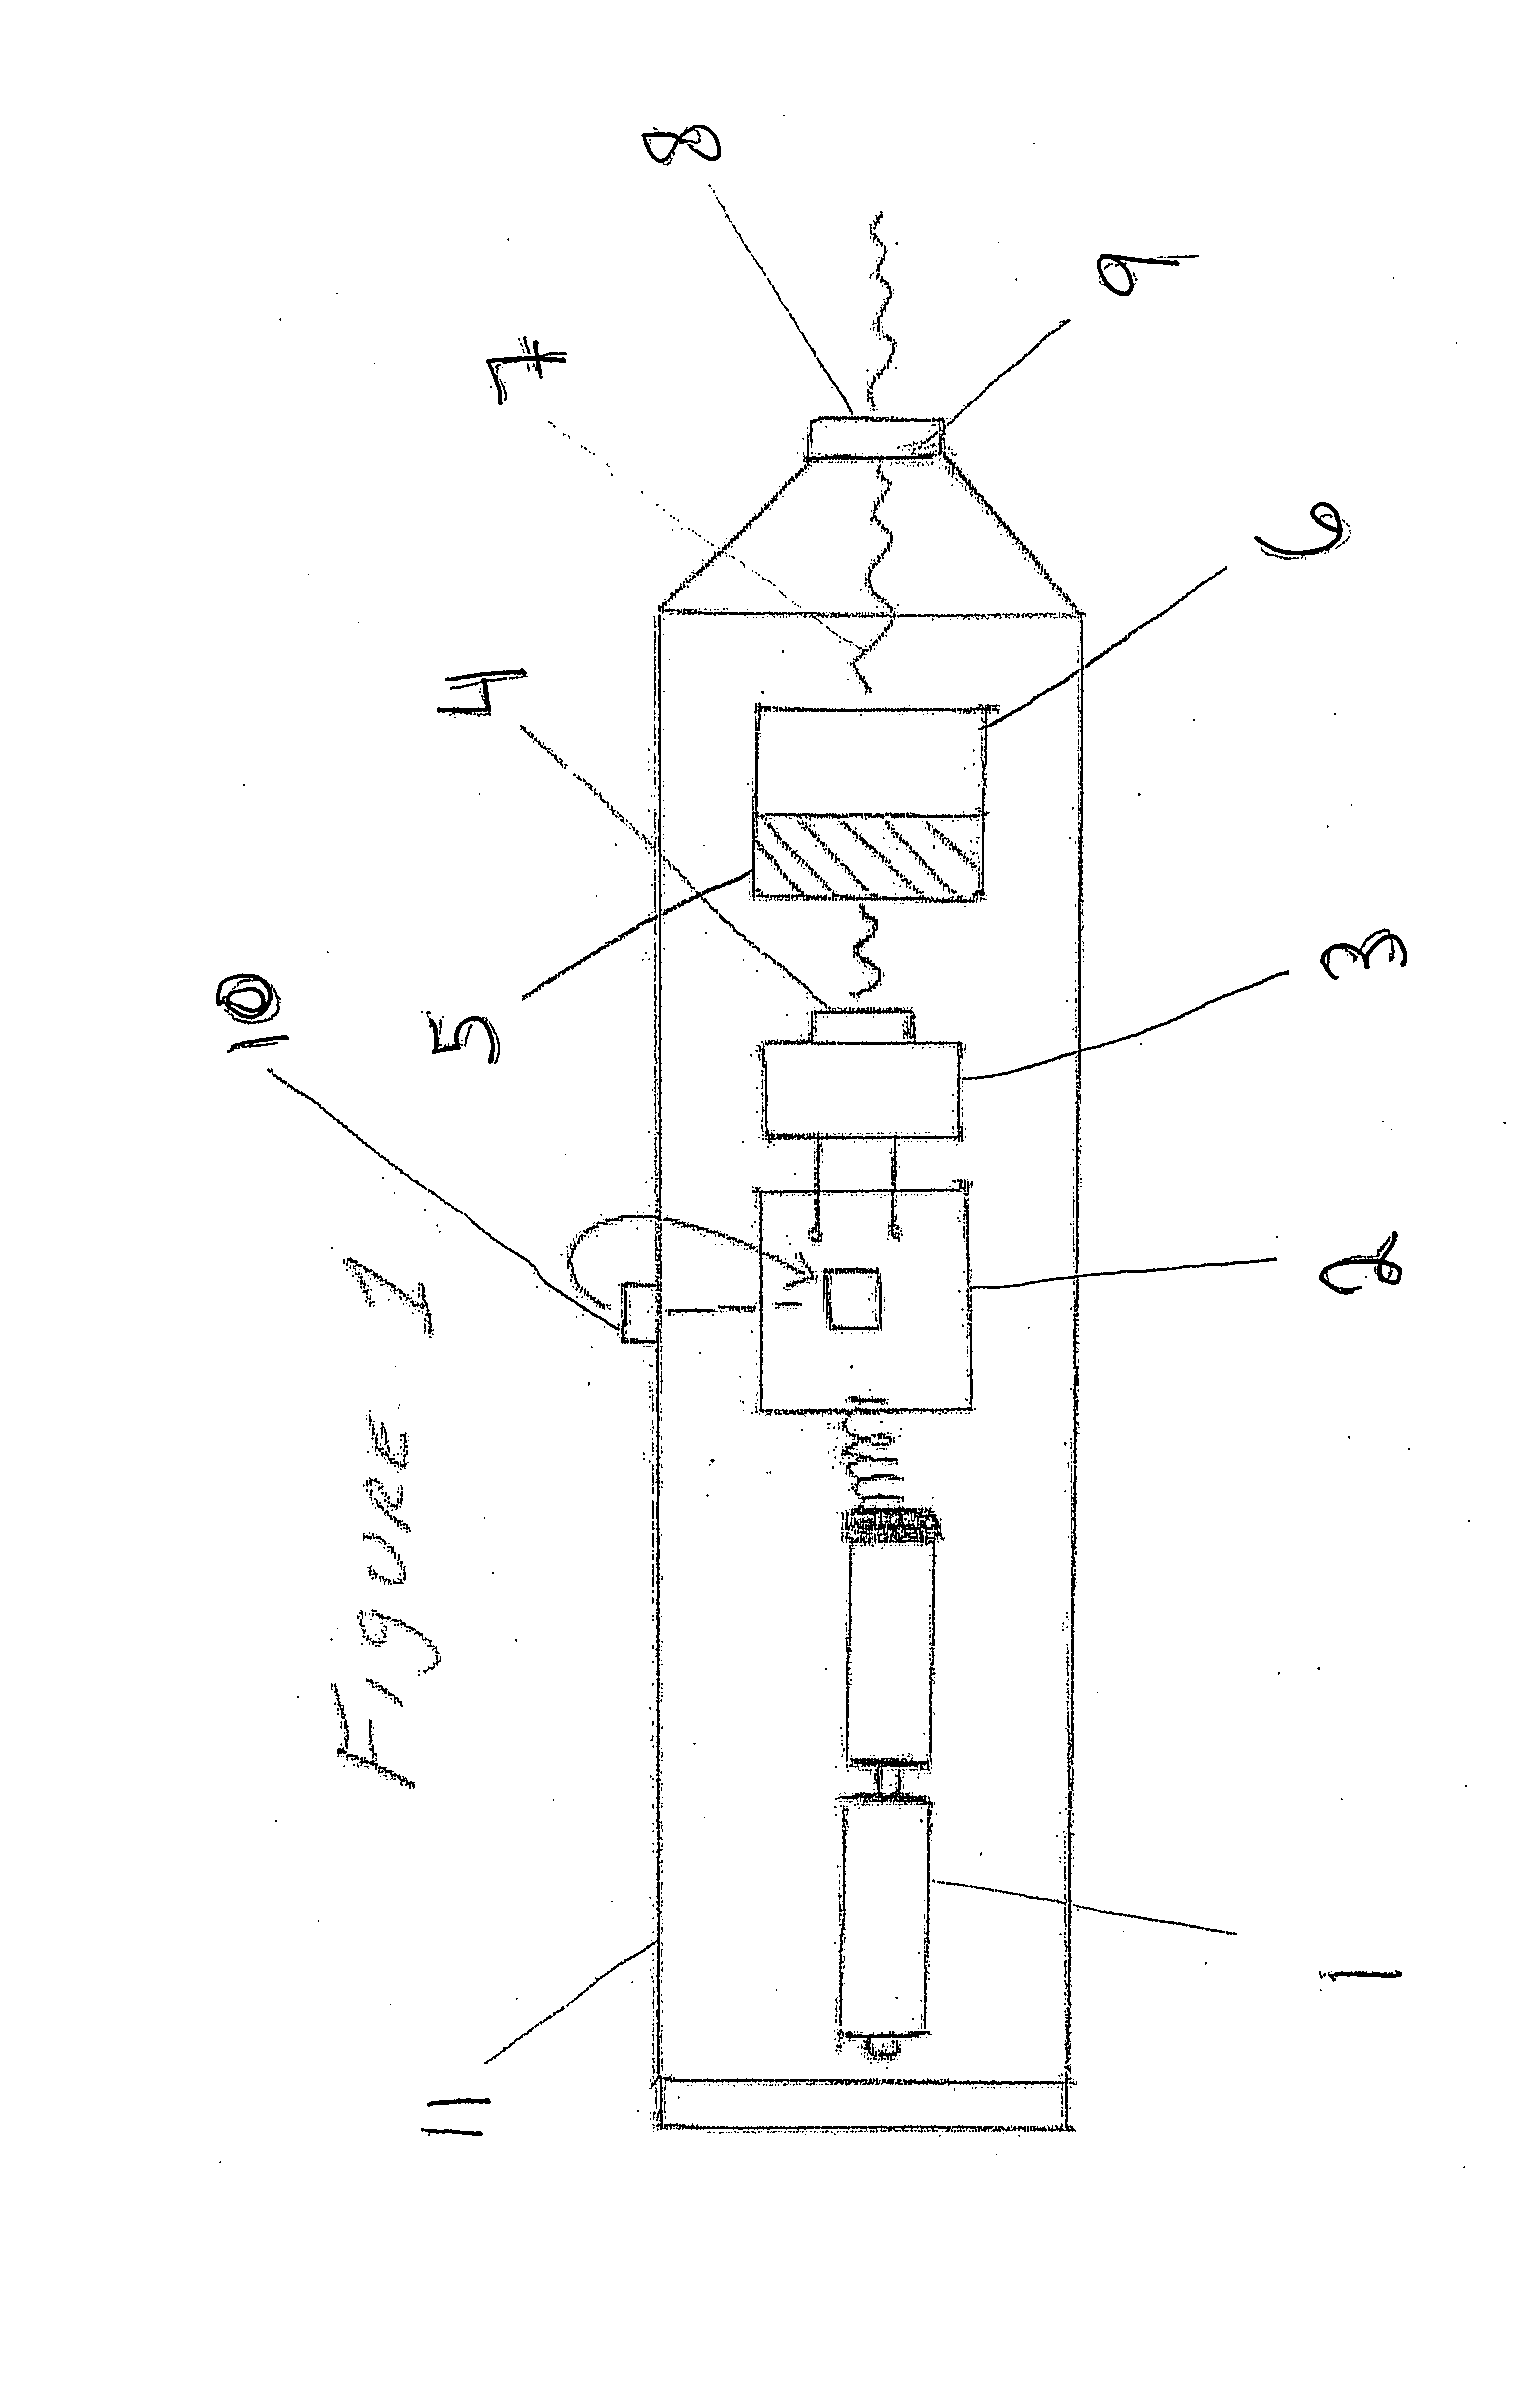 Device and method for treating musculo-skeletal injury and pain by application of laser light therapy